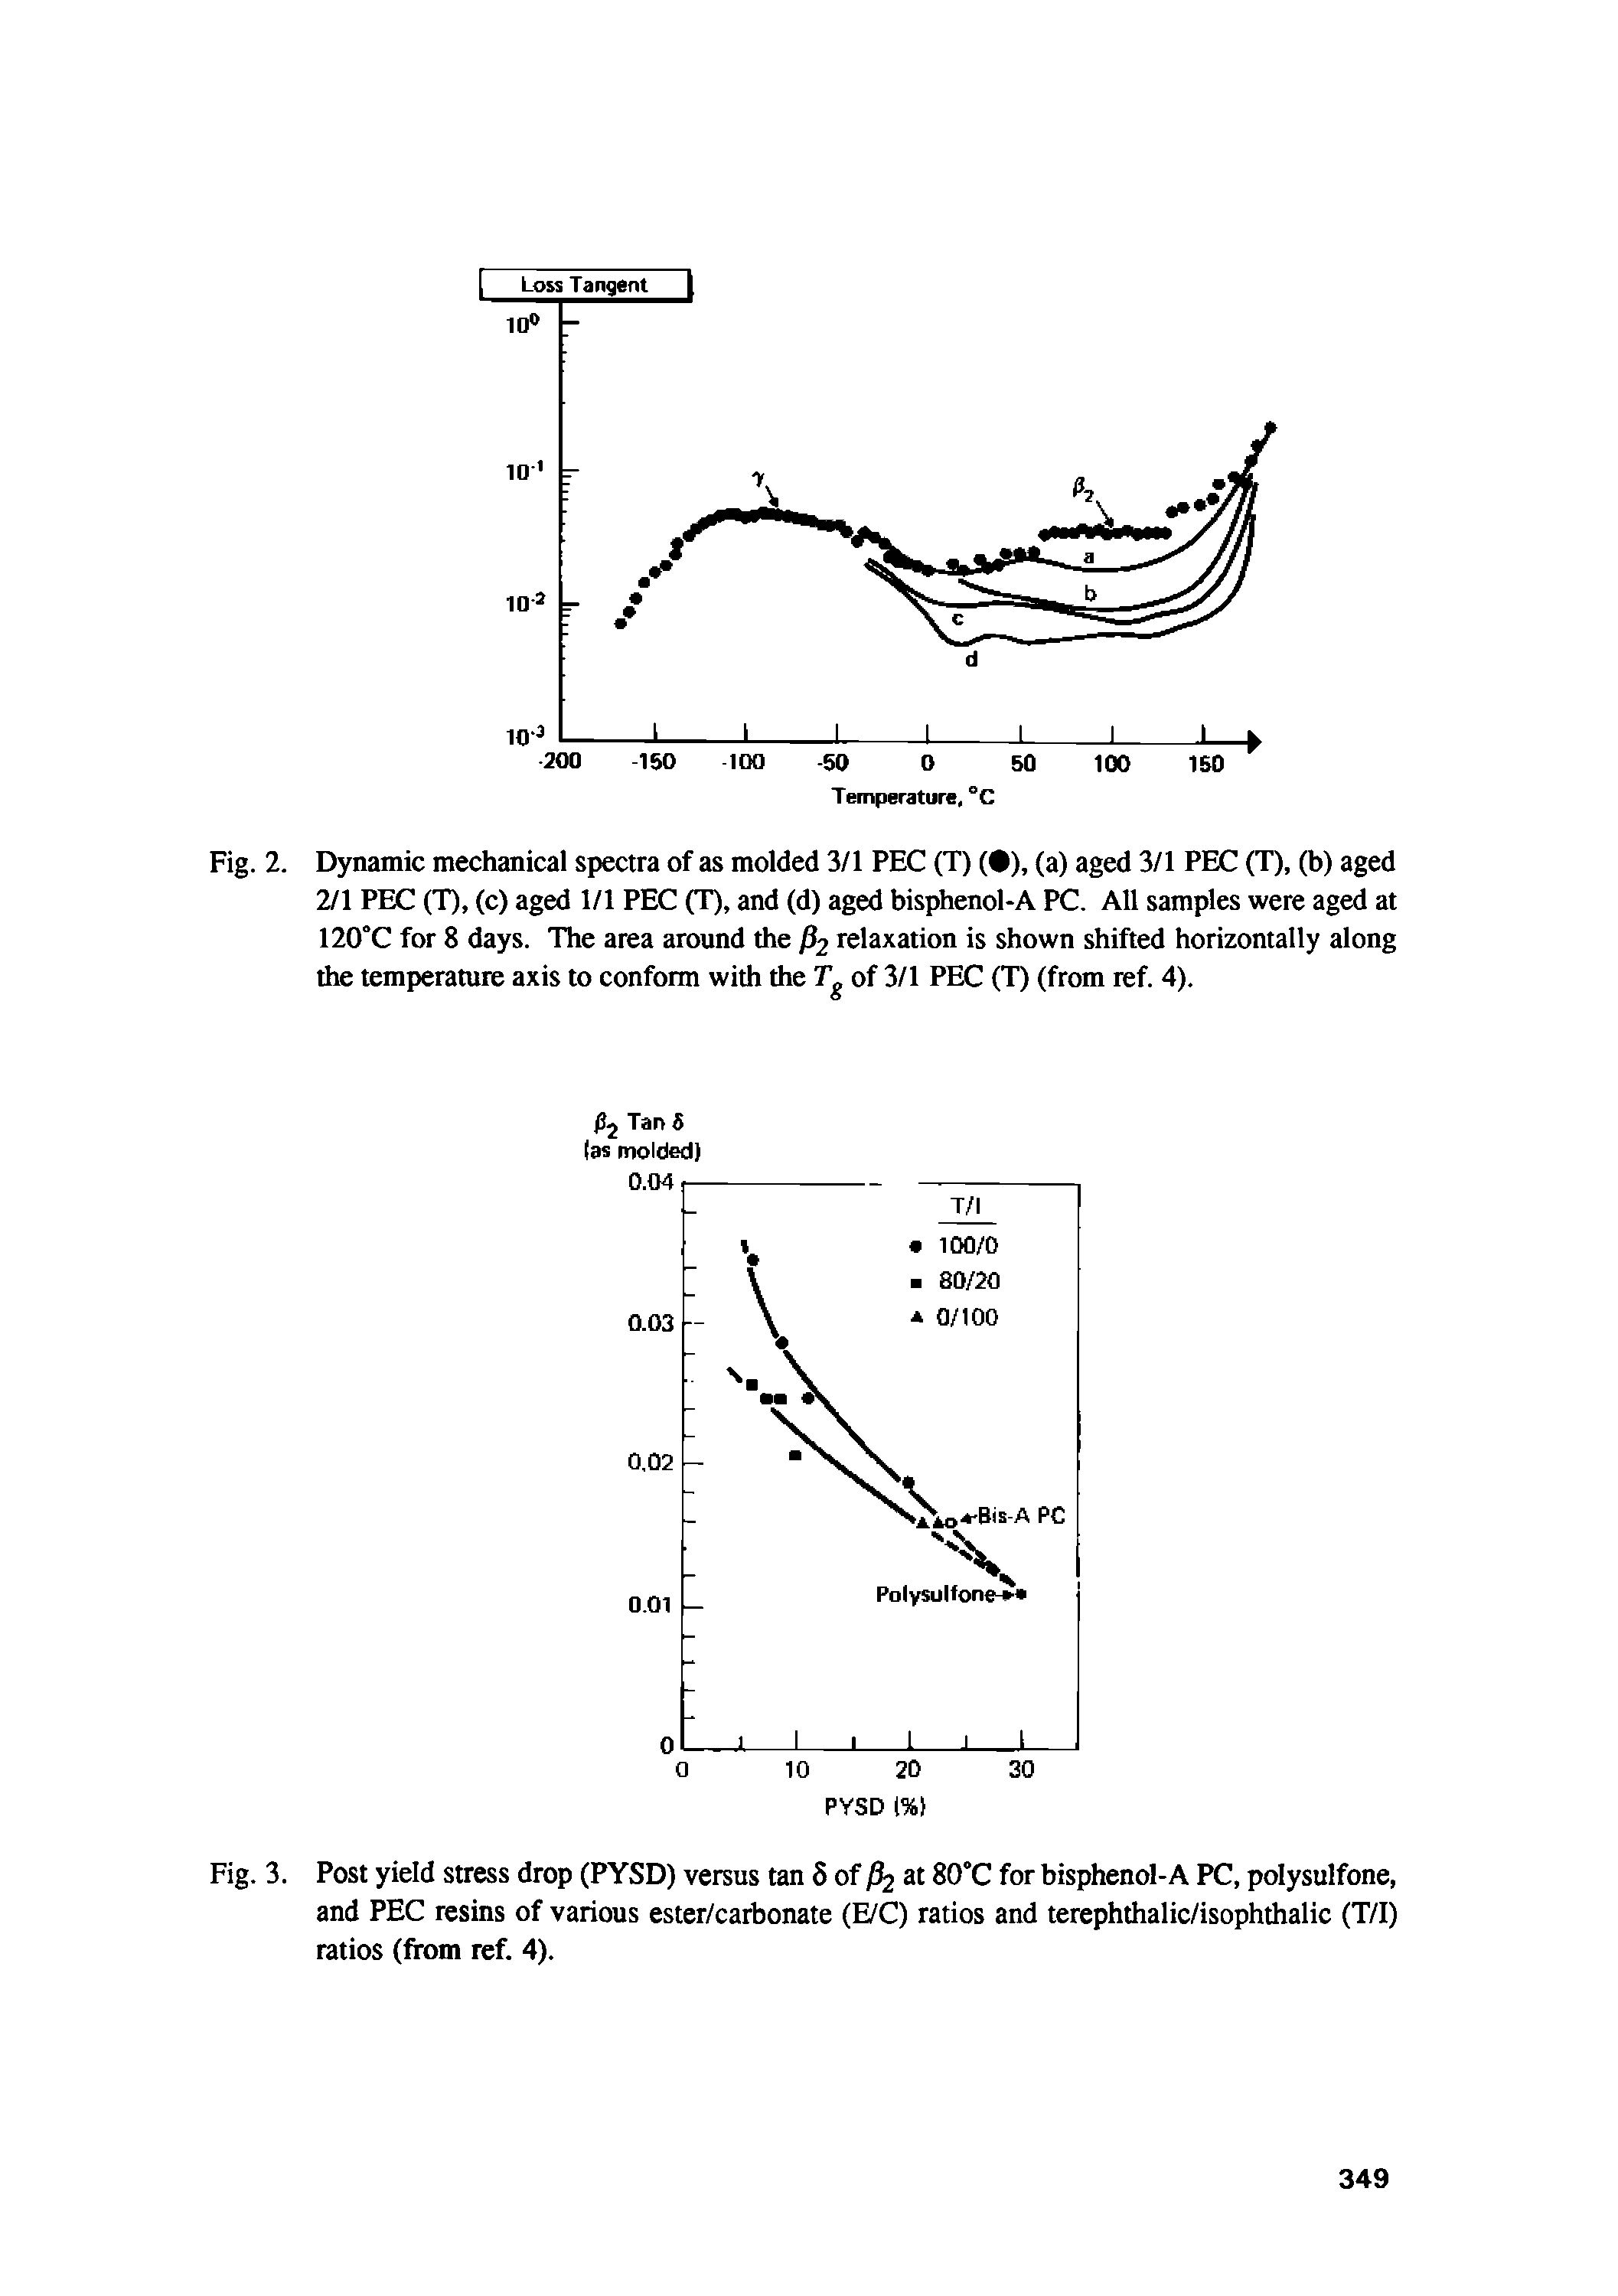 Fig. 3. Post yield stress drop (PYSD) versus tan 5 of at SCC for bisphenol-A PC, polysulfone, and PEC resins of various ester/caibonate (E/C) ratios and terephthalic/isophthalic (T/I) ratios (from lef. 4).